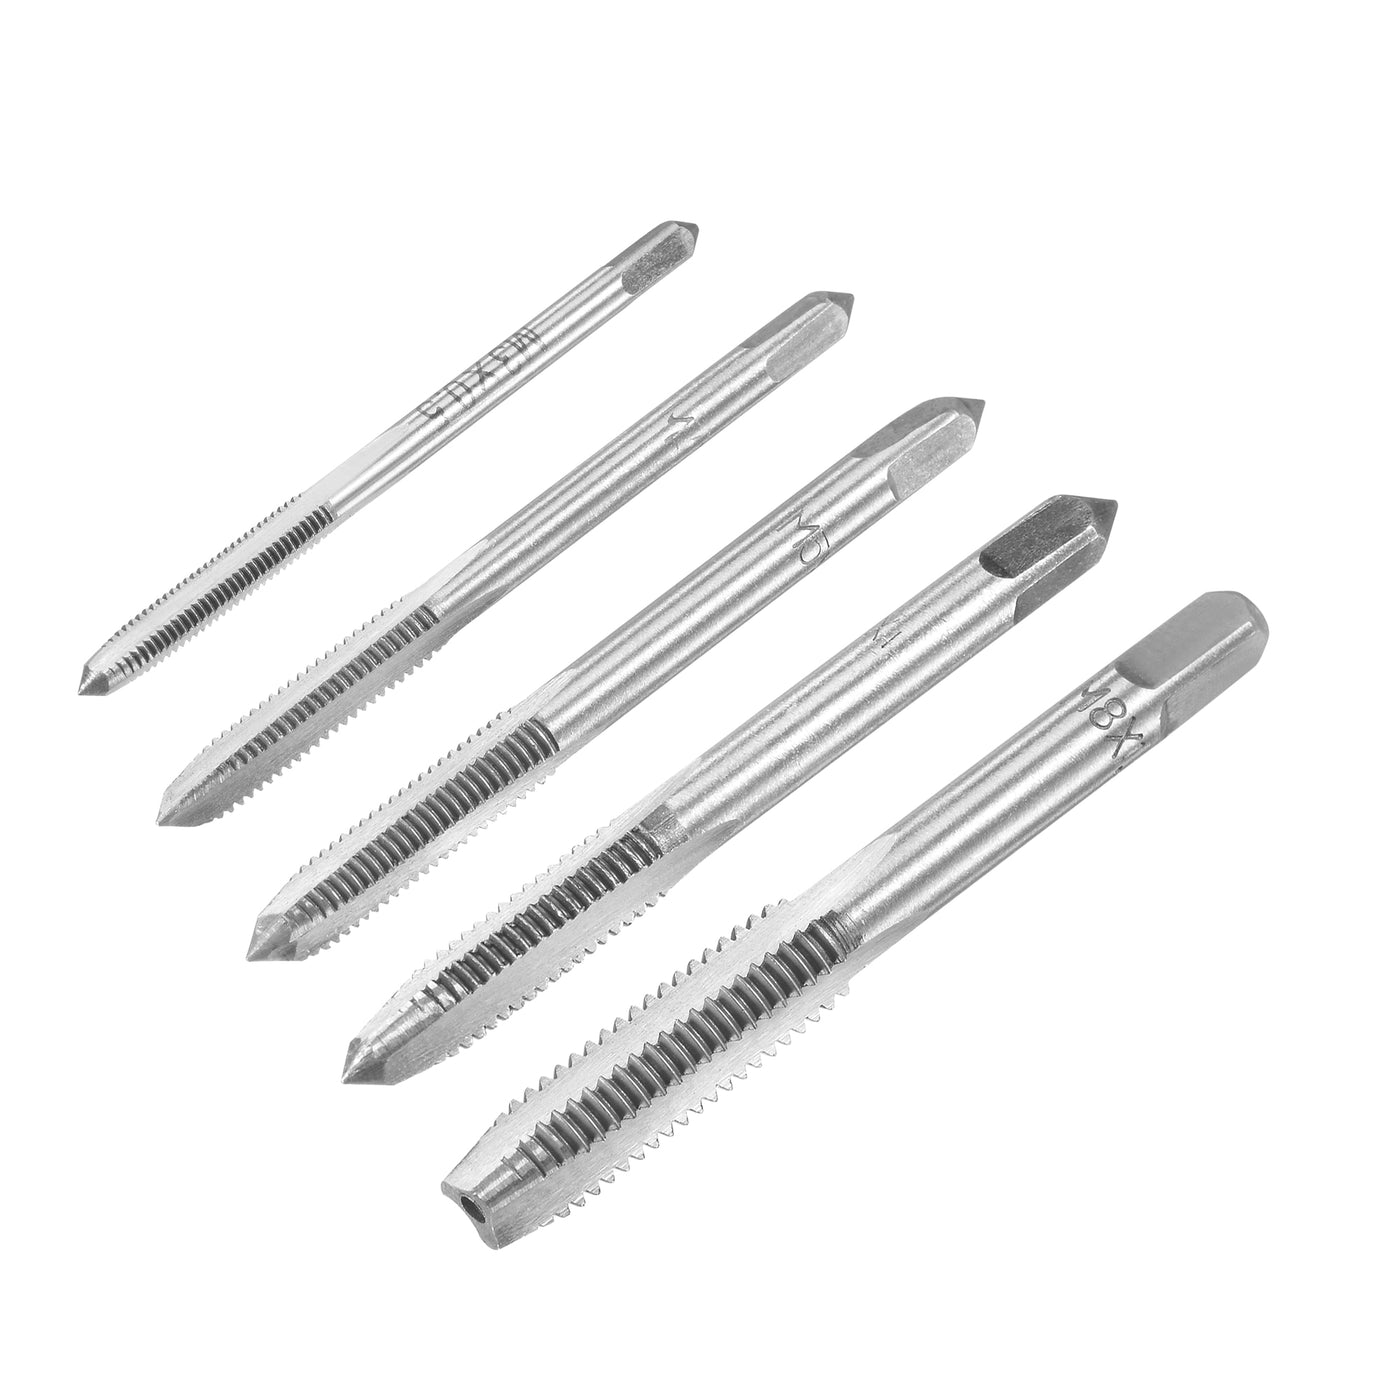 uxcell Uxcell M3 M4 M5 M6 M8 Hand Threading Tap Set High Speed Steel Straight Flutes Metric Thread Screw Taps Uncoated 5pcs